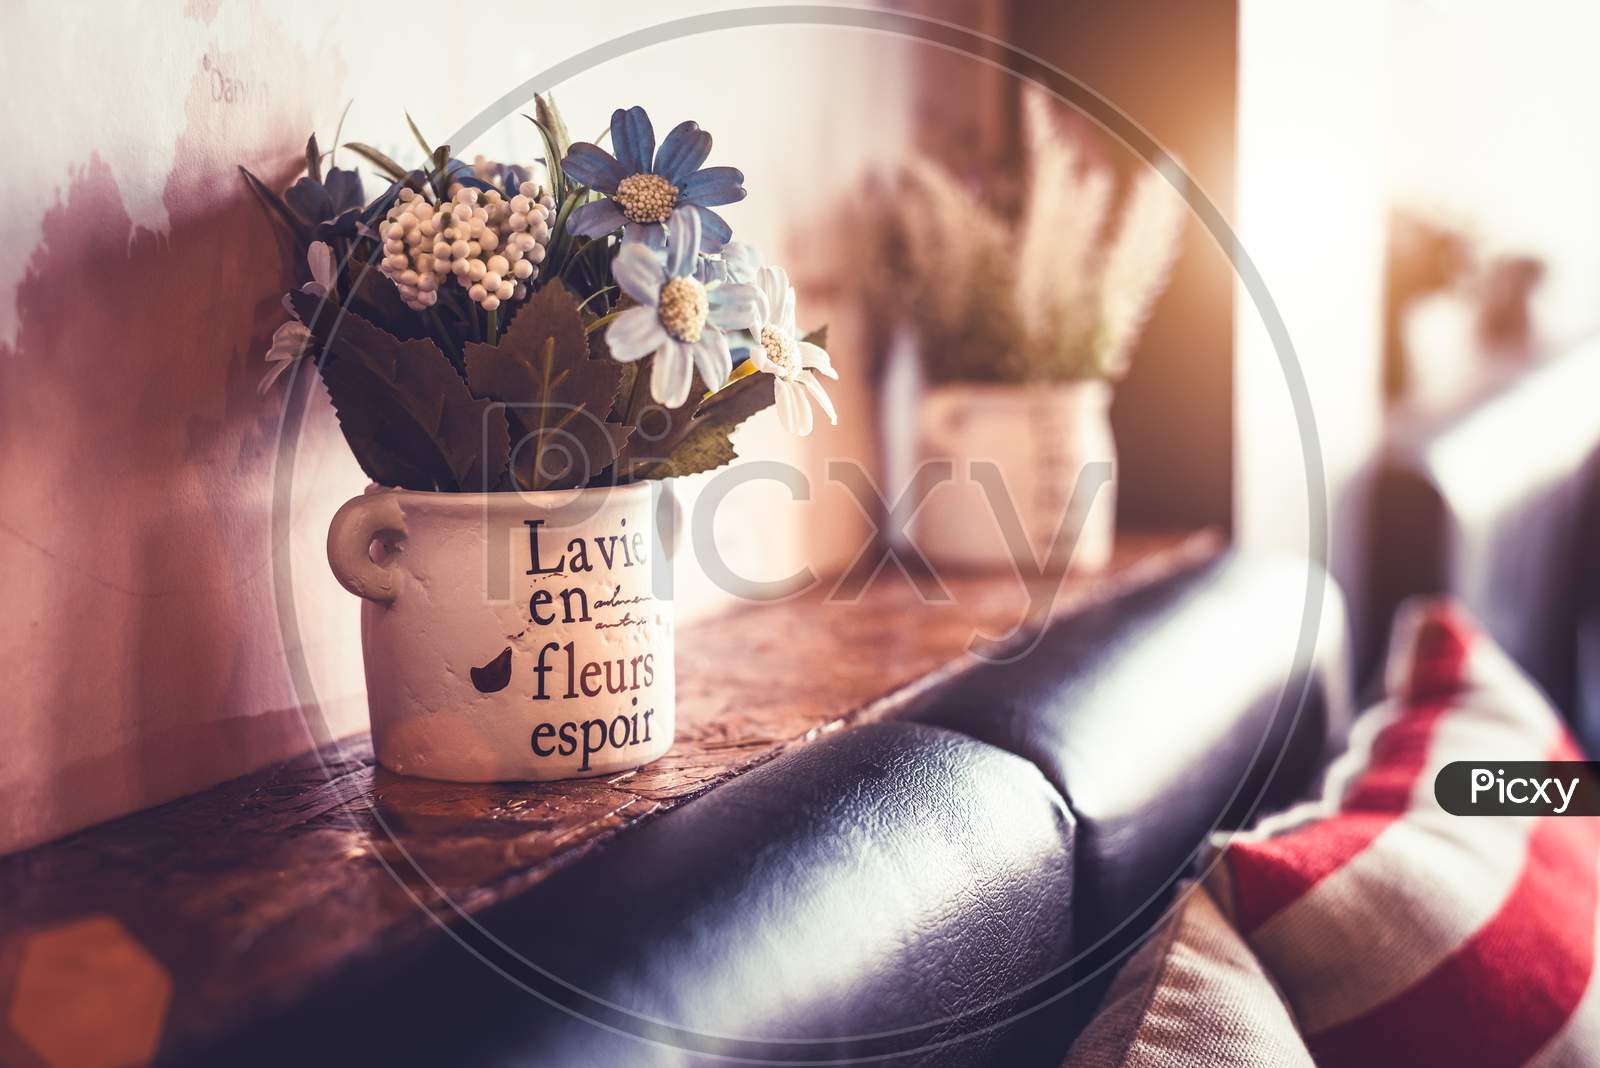 Flower Vase With Sofa And Pillow In Coffee Shop And Restaurant. Gardening Decoration And Interior Concept. Vintage Warm Tone Film.